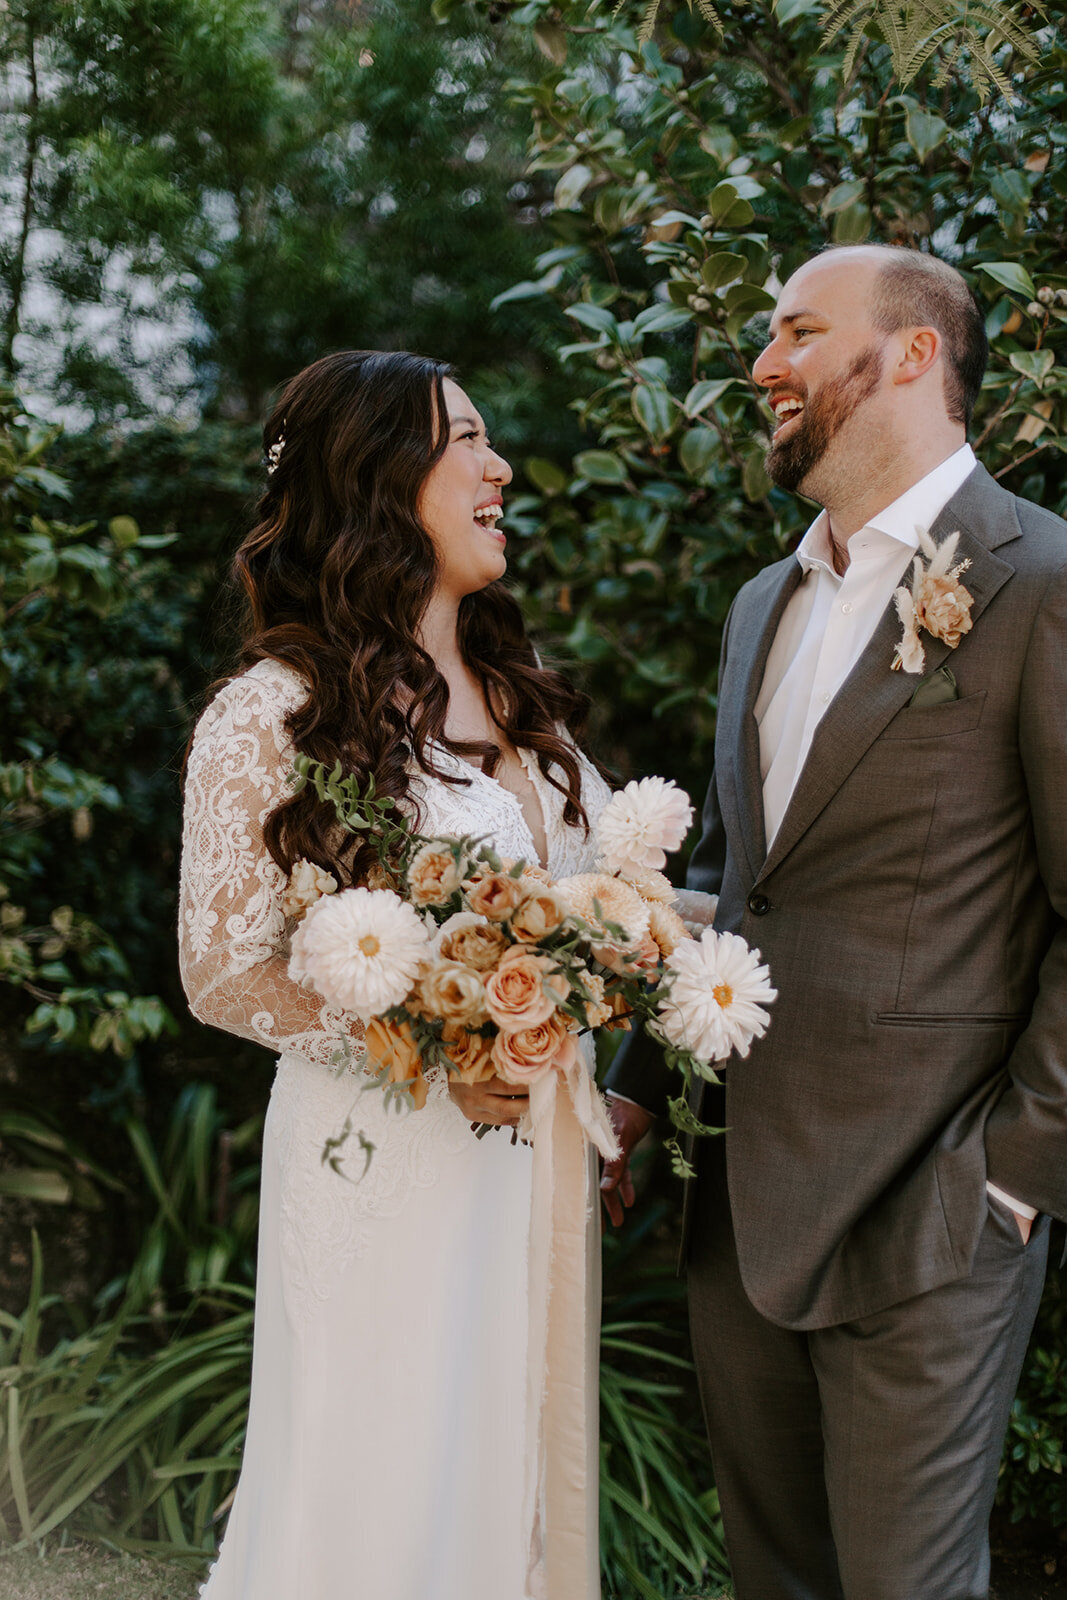 Lissa and Connor Wedding at the La Jolla Womens Club by Kara Reynolds Photography_173